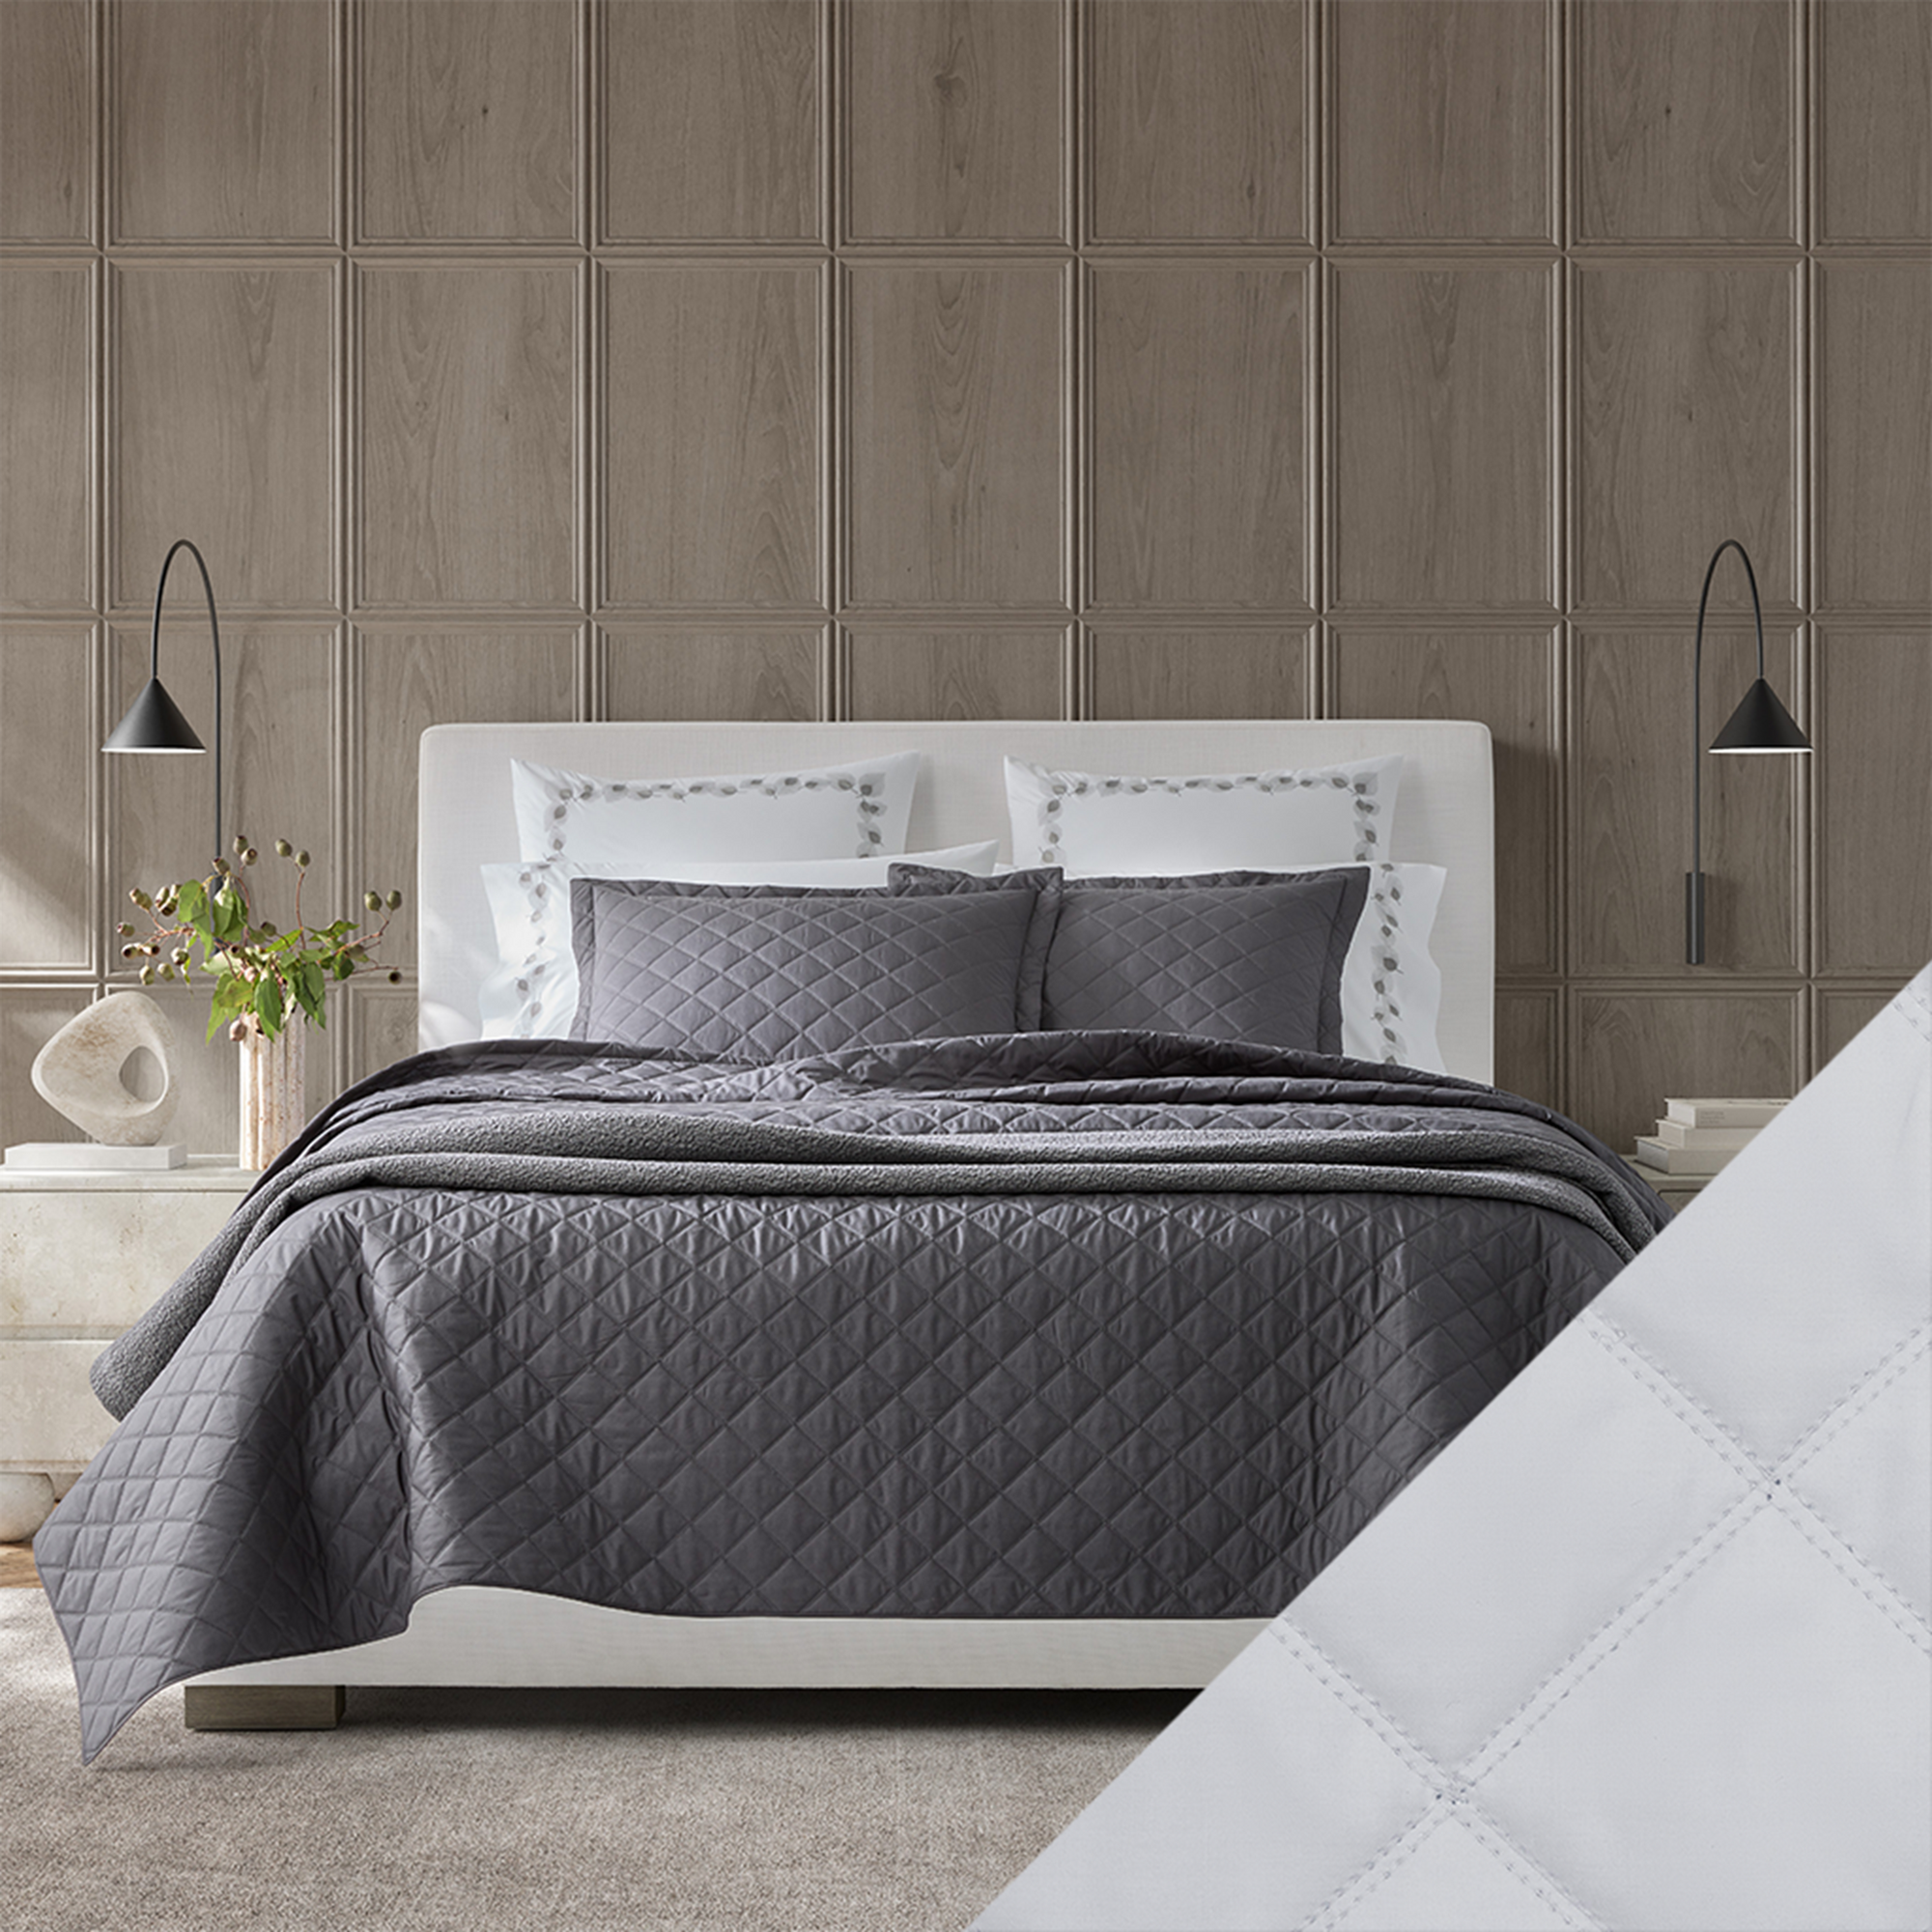 Bed Dressed in Matouk Milano Quilt Bedding with Swatch in Color Dove